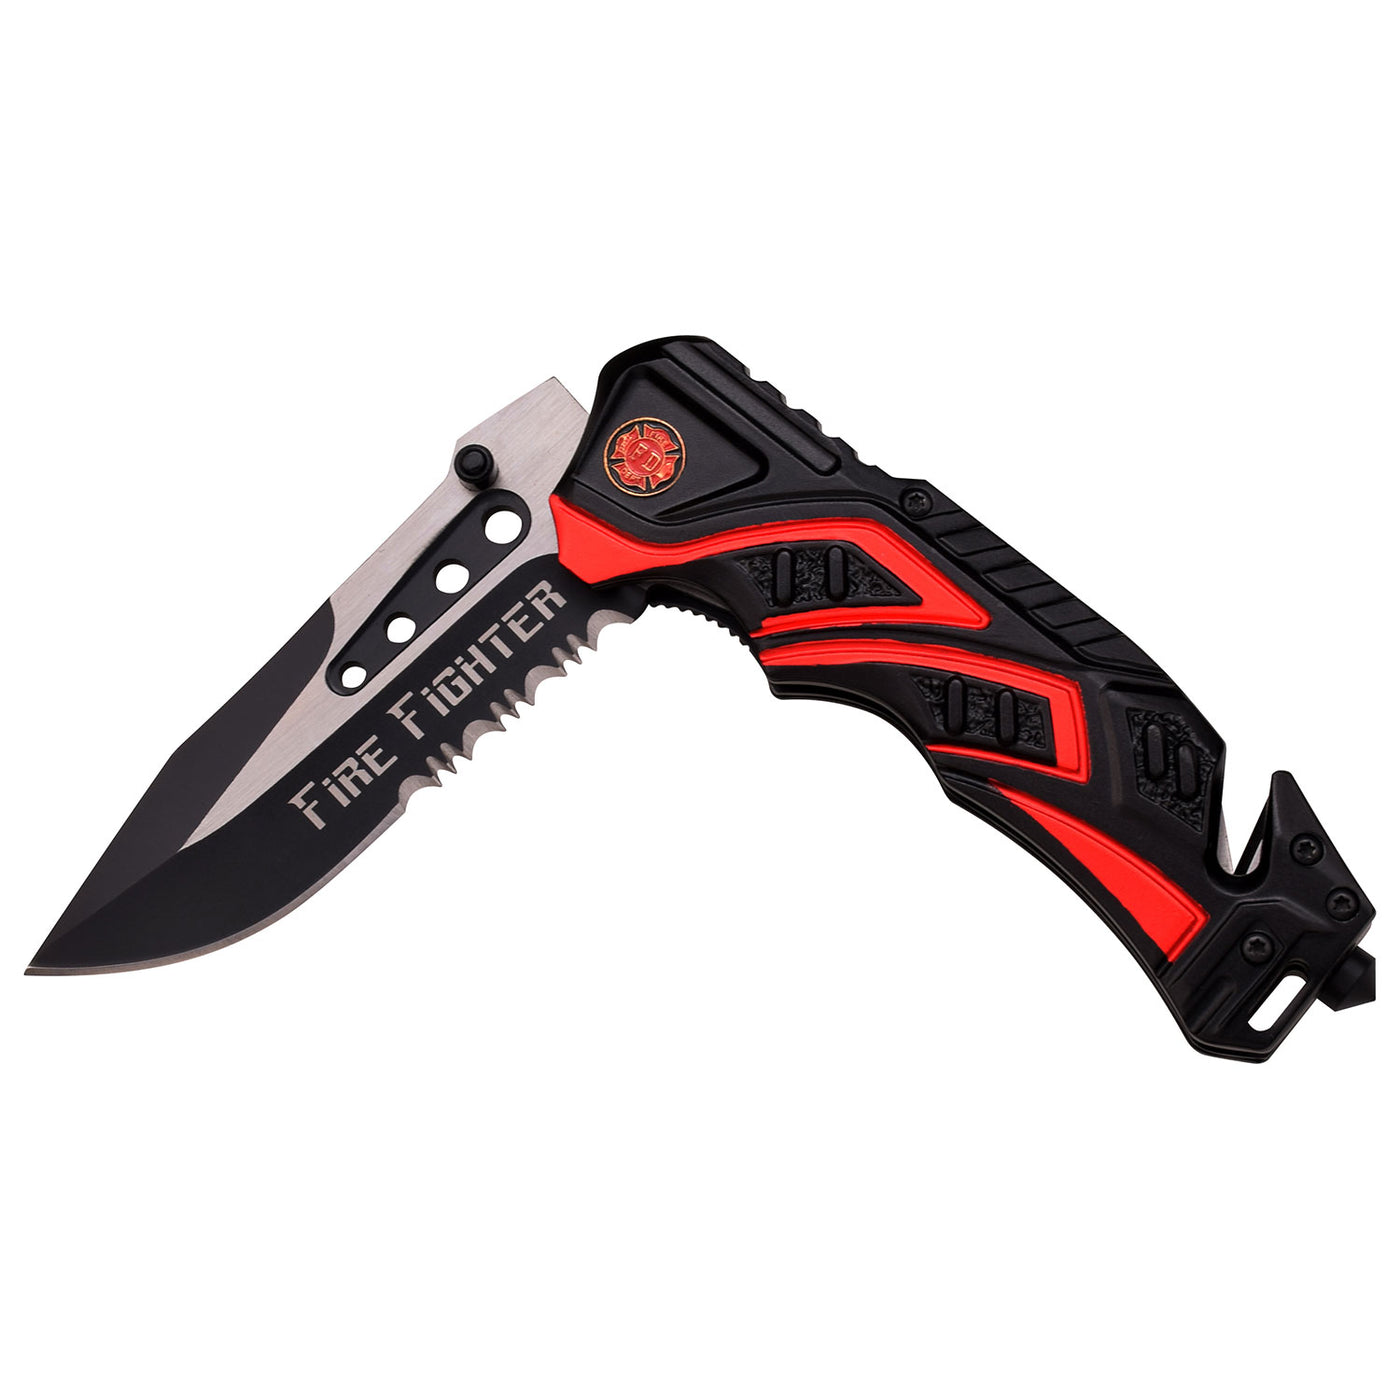 NAVAJA MTech USA 4.5" CLOSED BLACK AND RED TWO TONE ALUM HANDLE